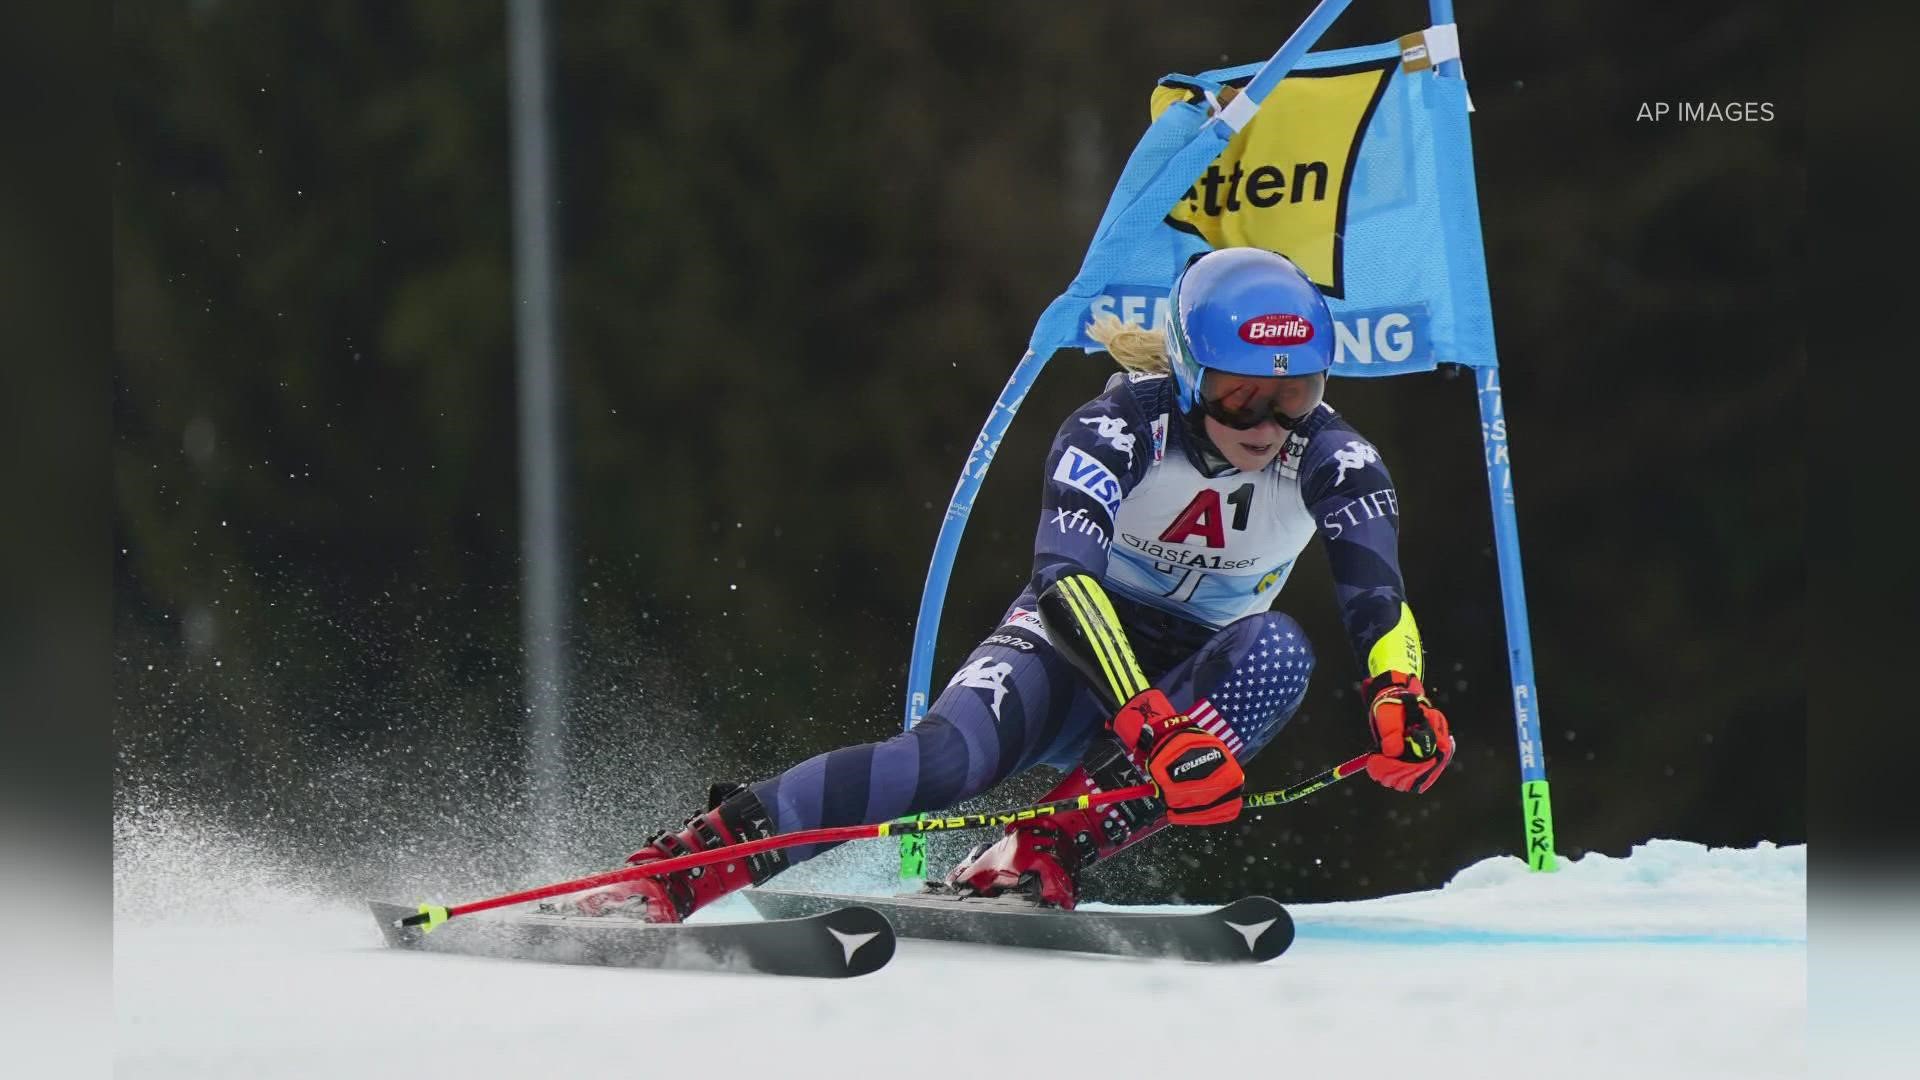 Wednesday's win was Shiffrin's 16th in GS, putting her in joint second place on the all-time winners list alongside Annemarie Moser-Pröll and Tessa Worley.